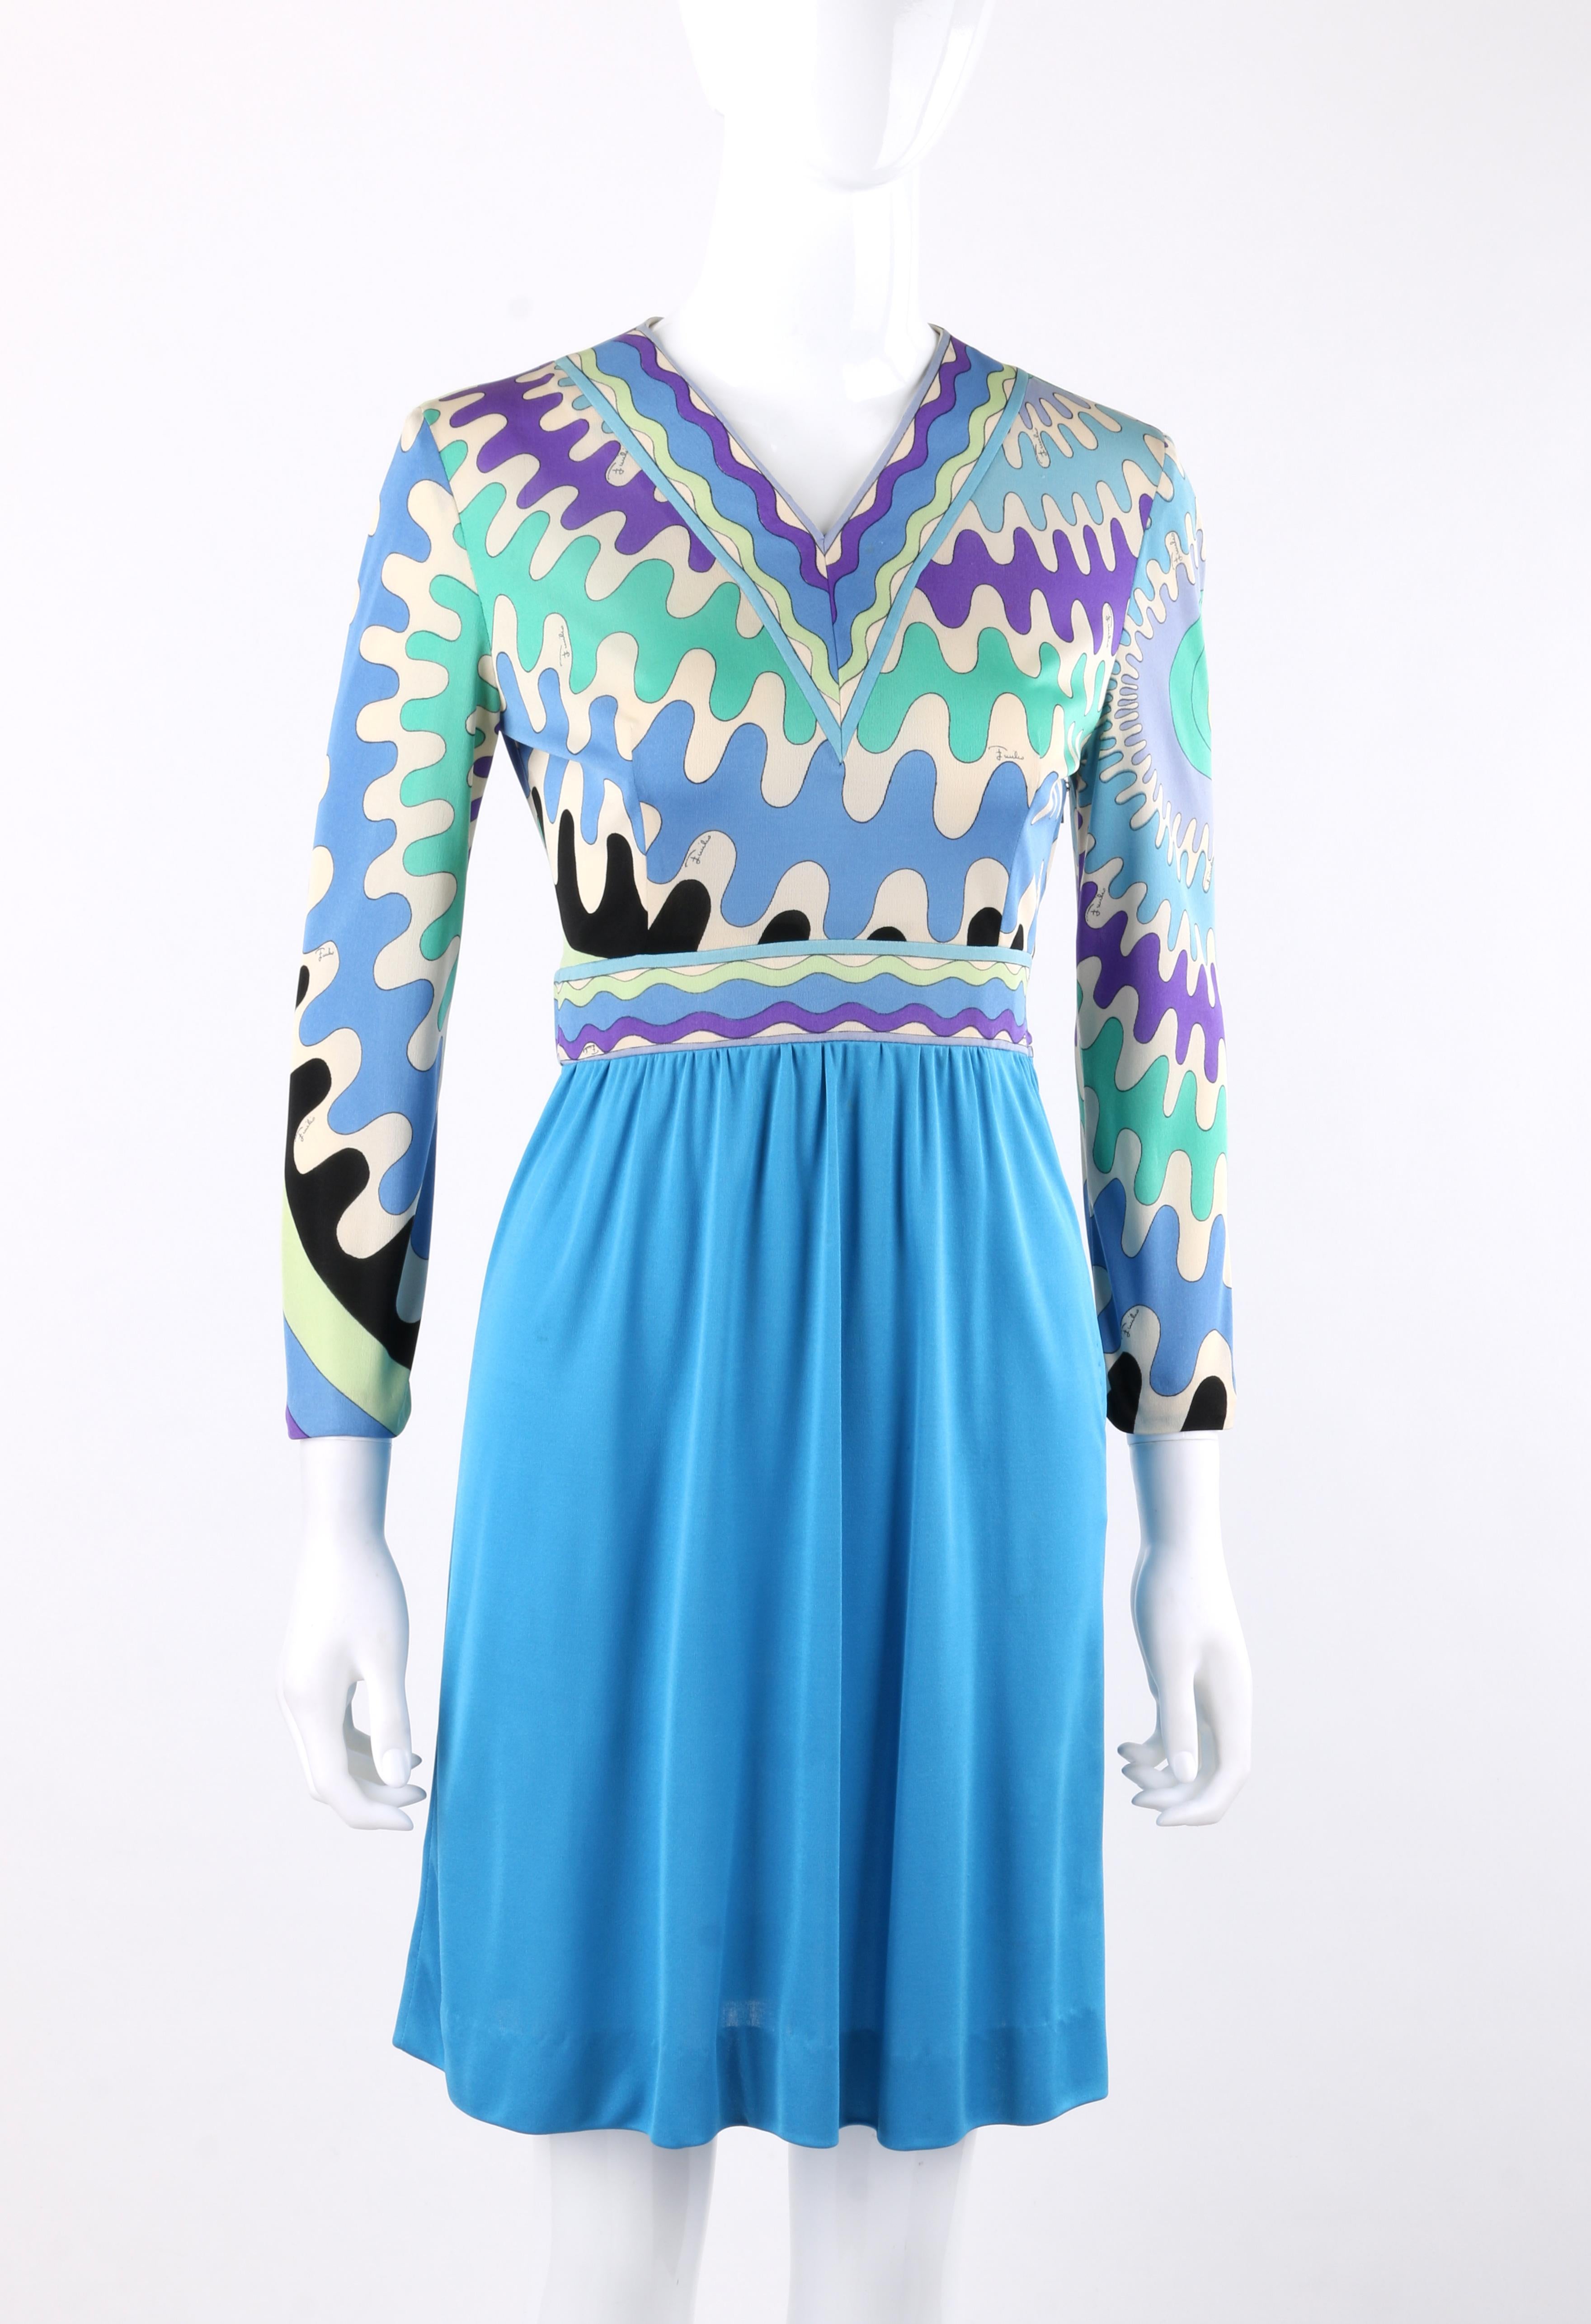 DESCRIPTION: EMILIO PUCCI c.1960's Mod Op Art Signature Print Silk Jersey Knit Shift Dress
 
Circa: c.1960’s
Label(s): Emilio Pucci; Made in Italy for Lord & Taylor 
Designer: Emilio Pucci
Style: Shift dress
Color(s): Multi in shades of blue, green,